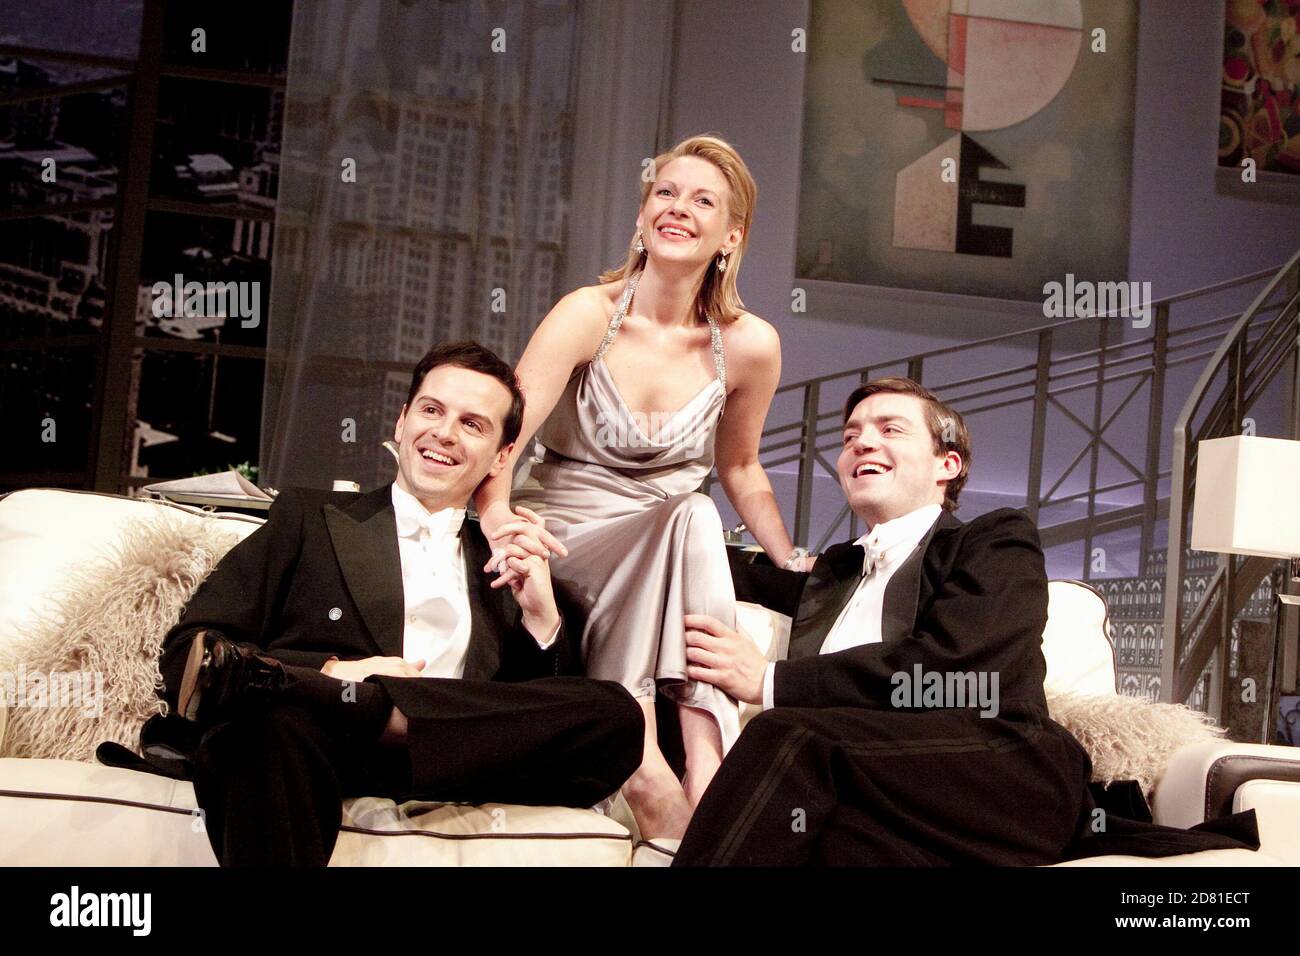 l-r: Andrew Scott (Leo), Lisa Dillon (Gilda), Tom Burke (Otto) in DESIGN FOR LIVING by Noel Coward at the Old Vic Theatre, London  2010  design: Lez Brotherston  lighting: David Hersey  director: Anthony Page Stock Photo